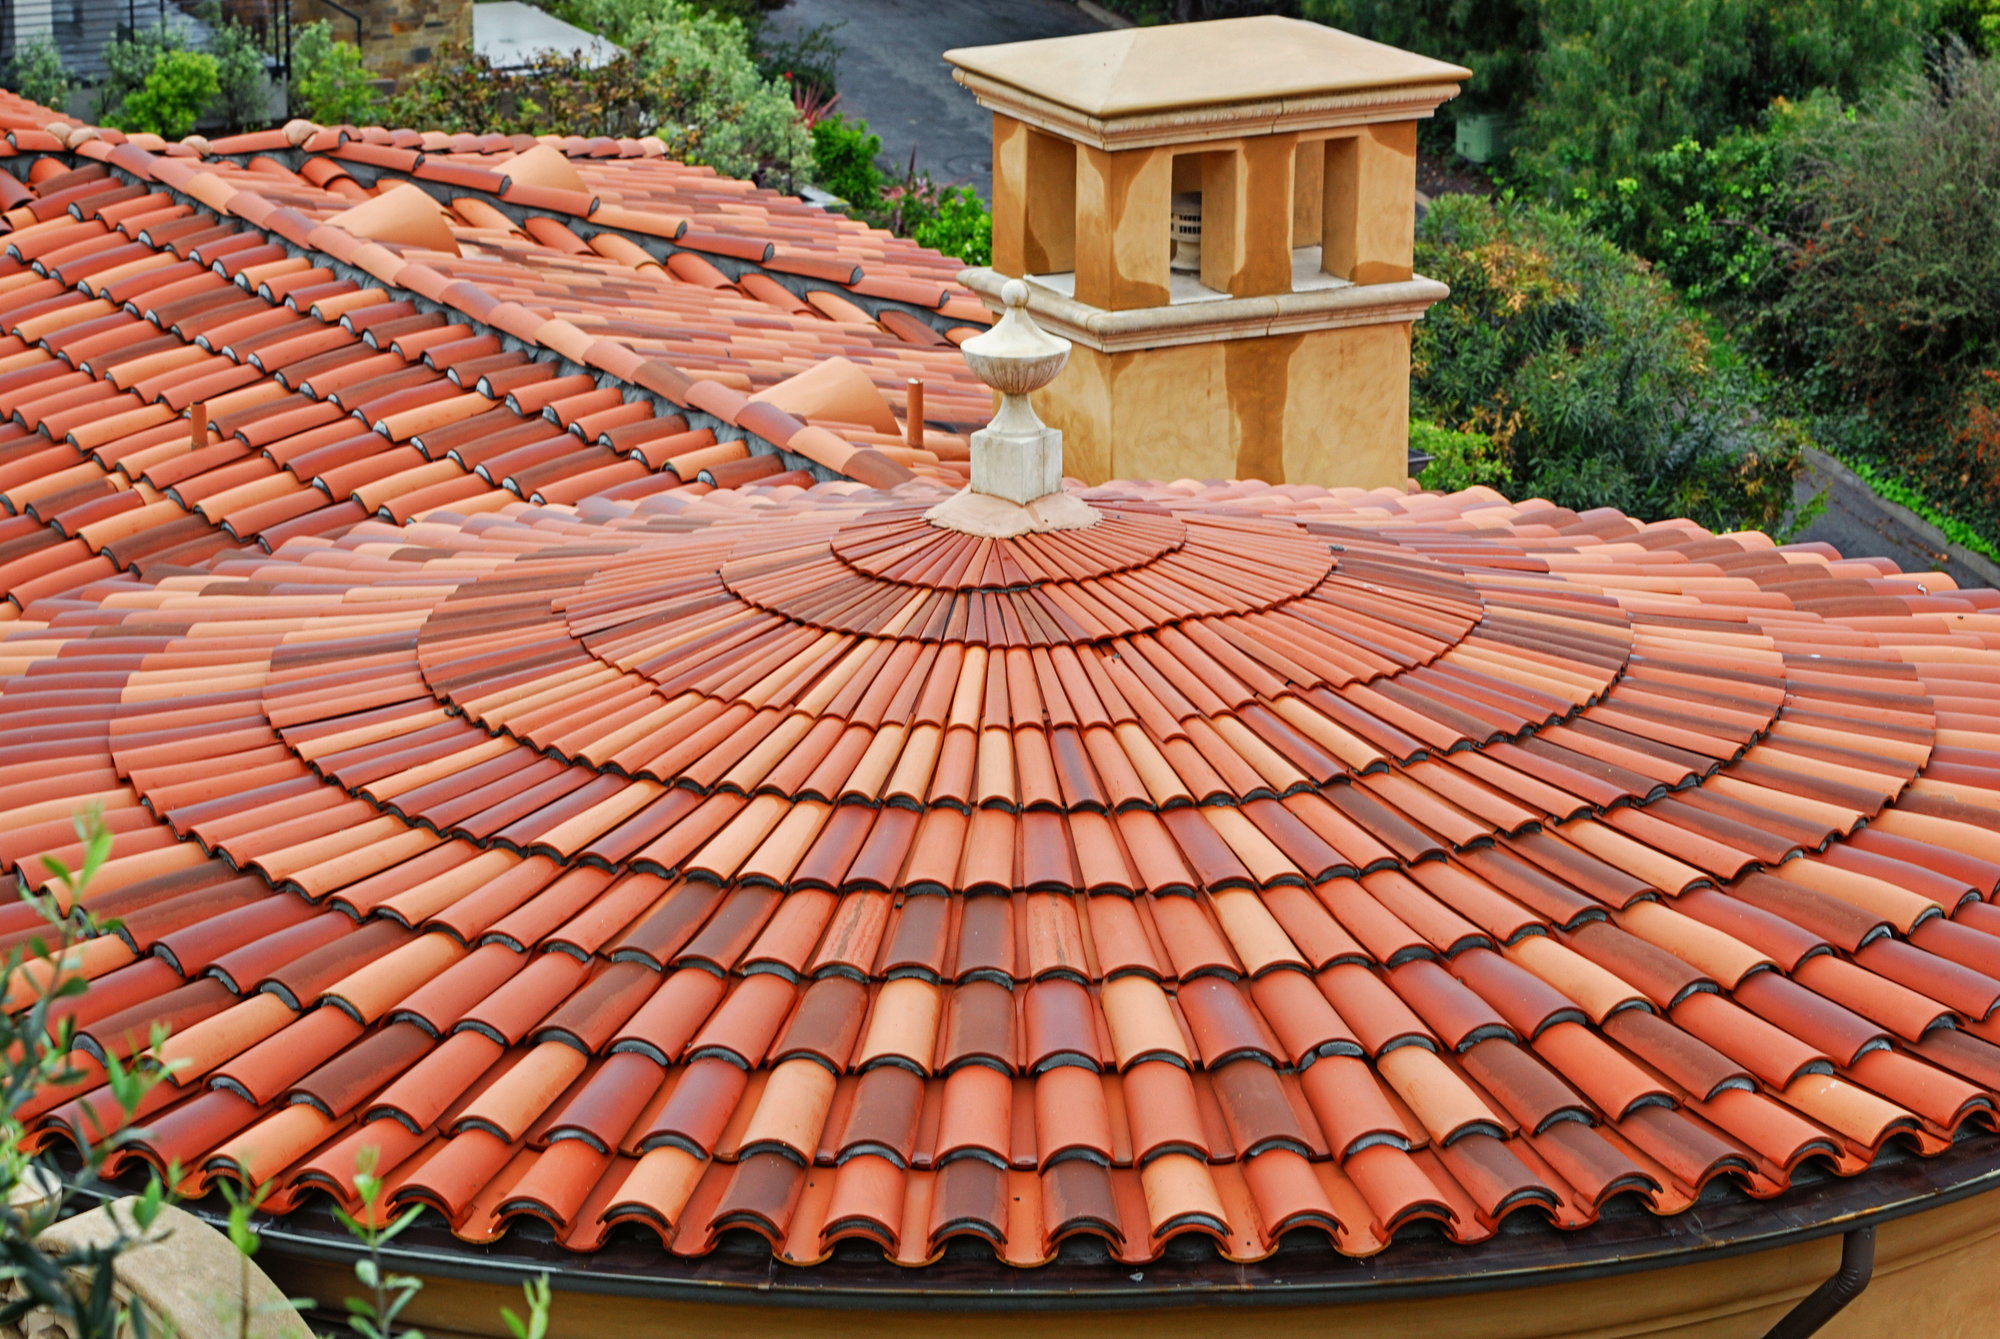 Installing a Clay Tile Roof | DoItYourself.com